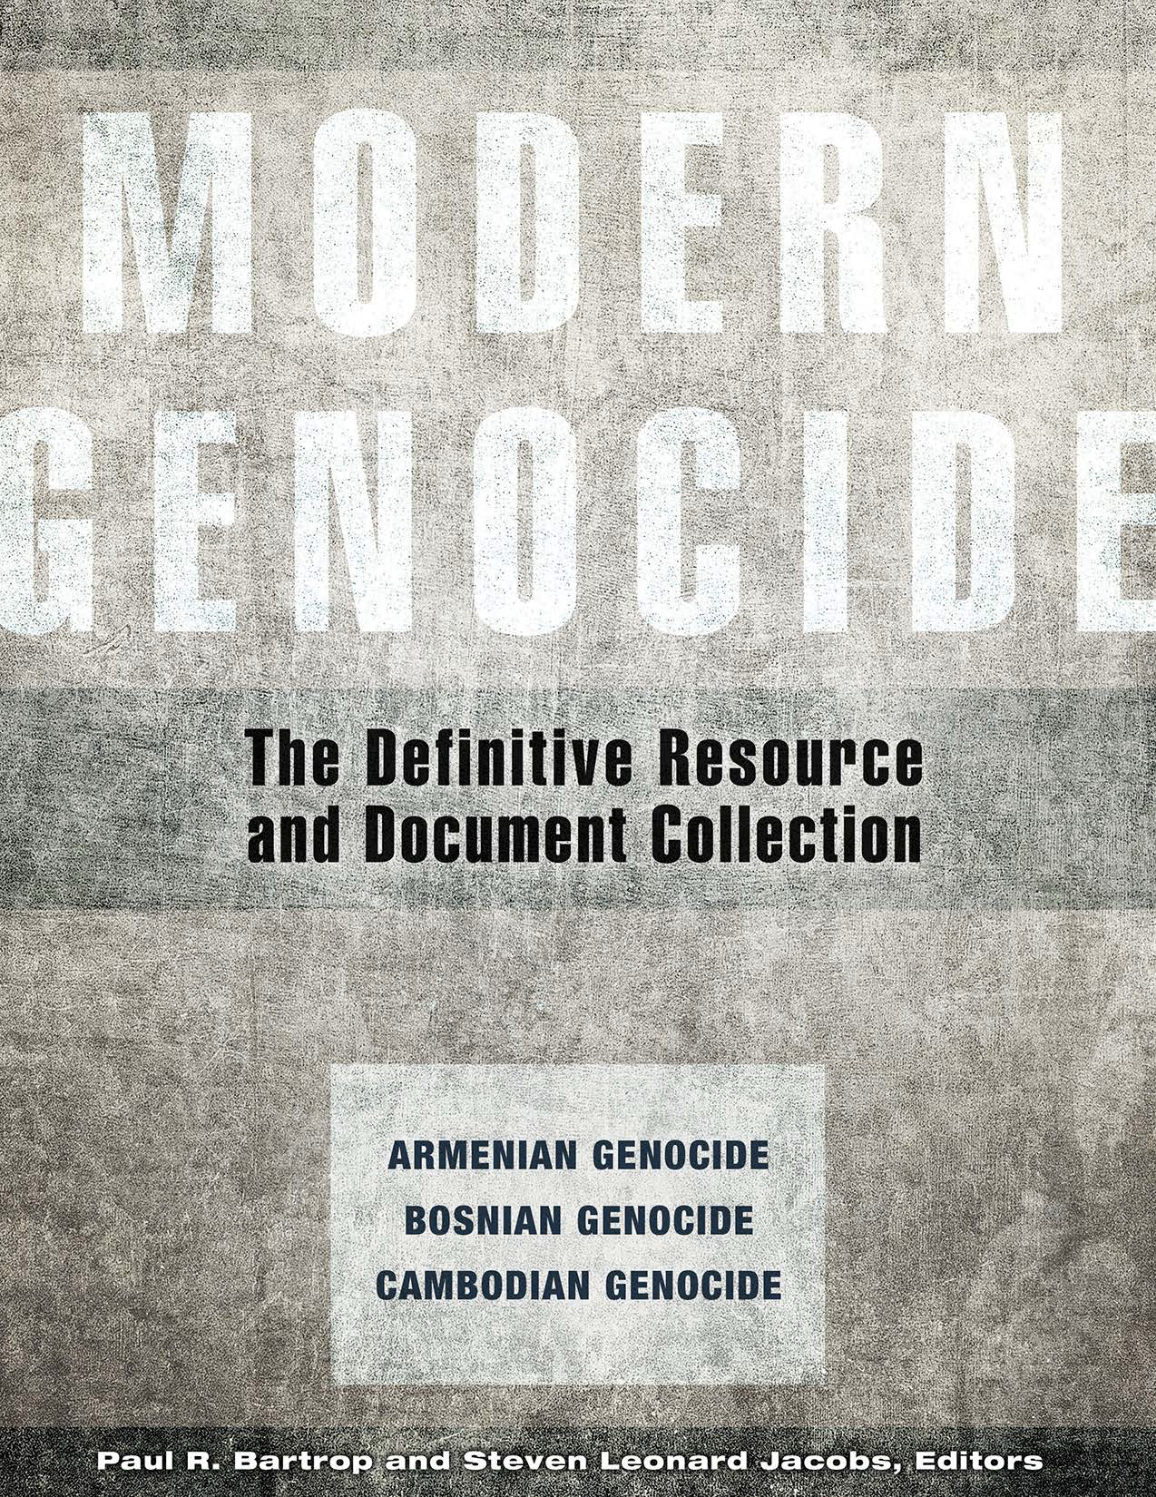 Modern Genocide: The Definitive Resource and Document Collection [4 volumes] page Cover1